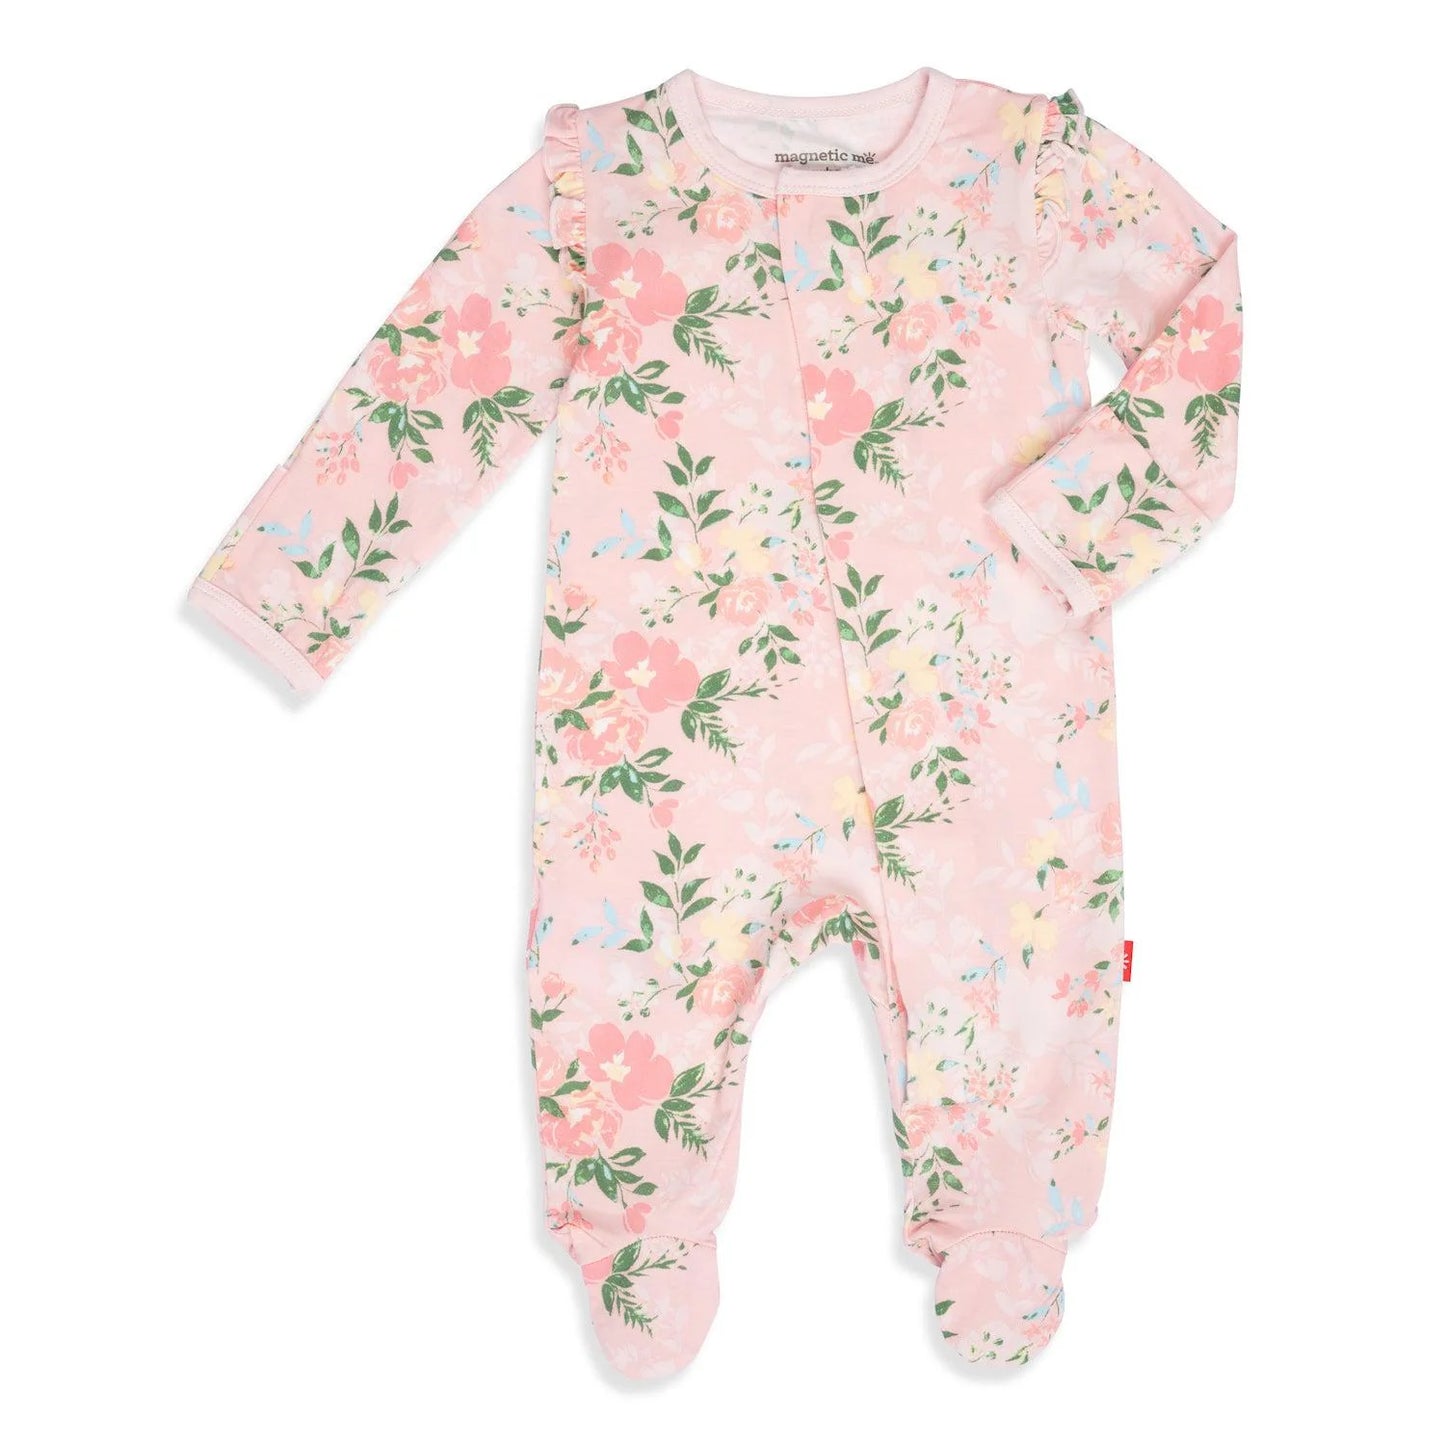 Ainslee Modal Magnetic Ruffled Sleeve Footie  - Doodlebug's Children's Boutique